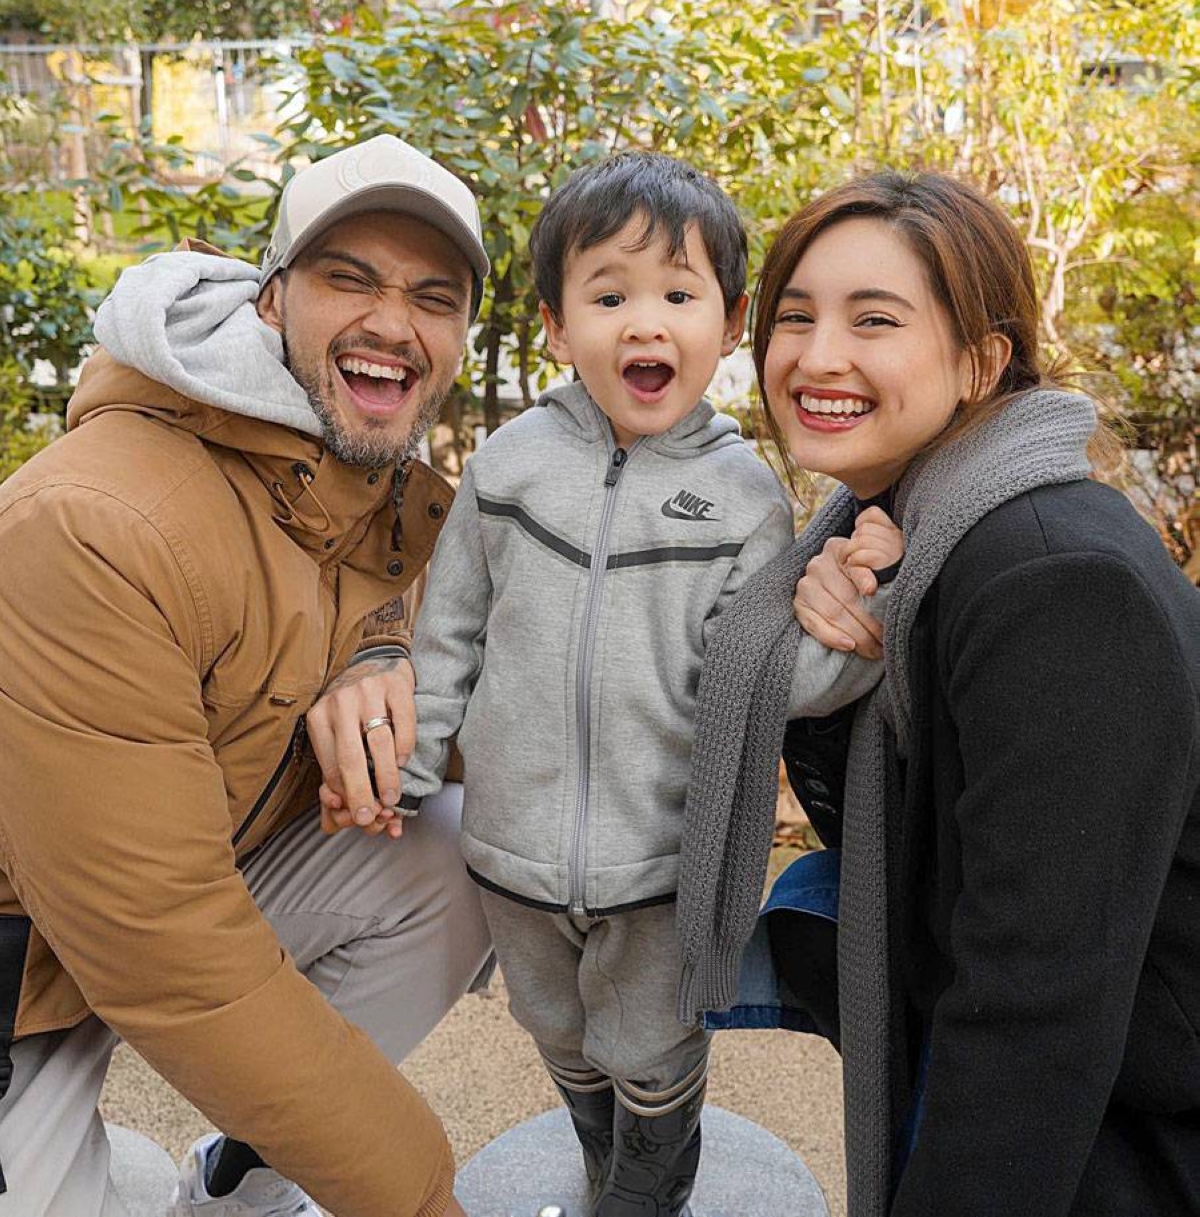 The actress took a hiatus to raise Amari, her first child with husband Billy Crawford.